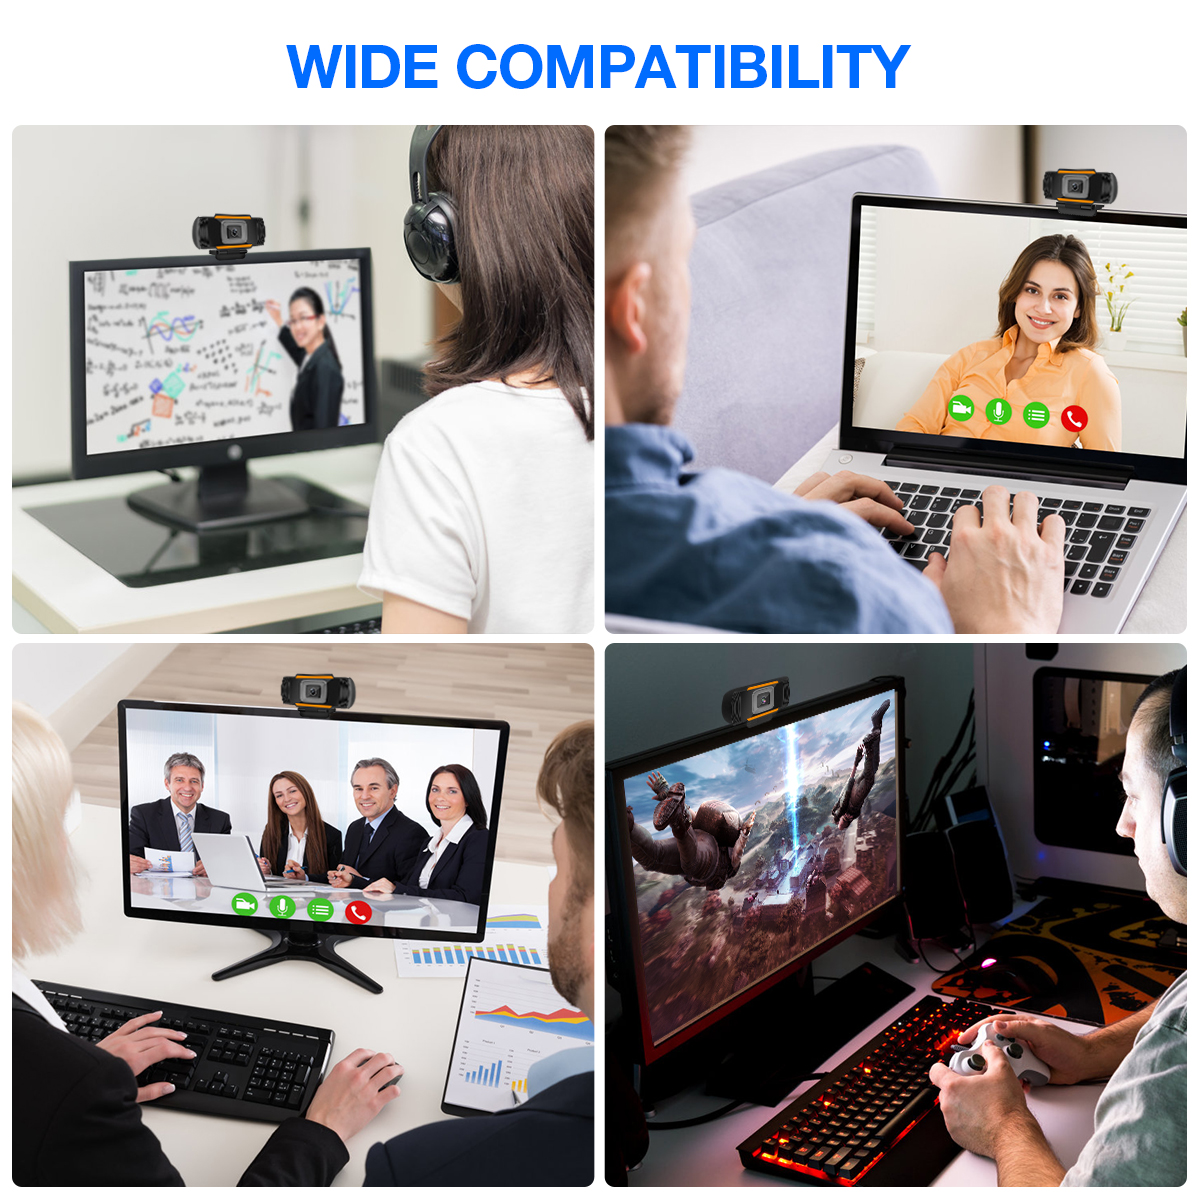 720P HD Free Drive USB Webcam Automatic Dimming Conference Live Computer Camera Built-in Noise Reduction Microphone for PC Laptop